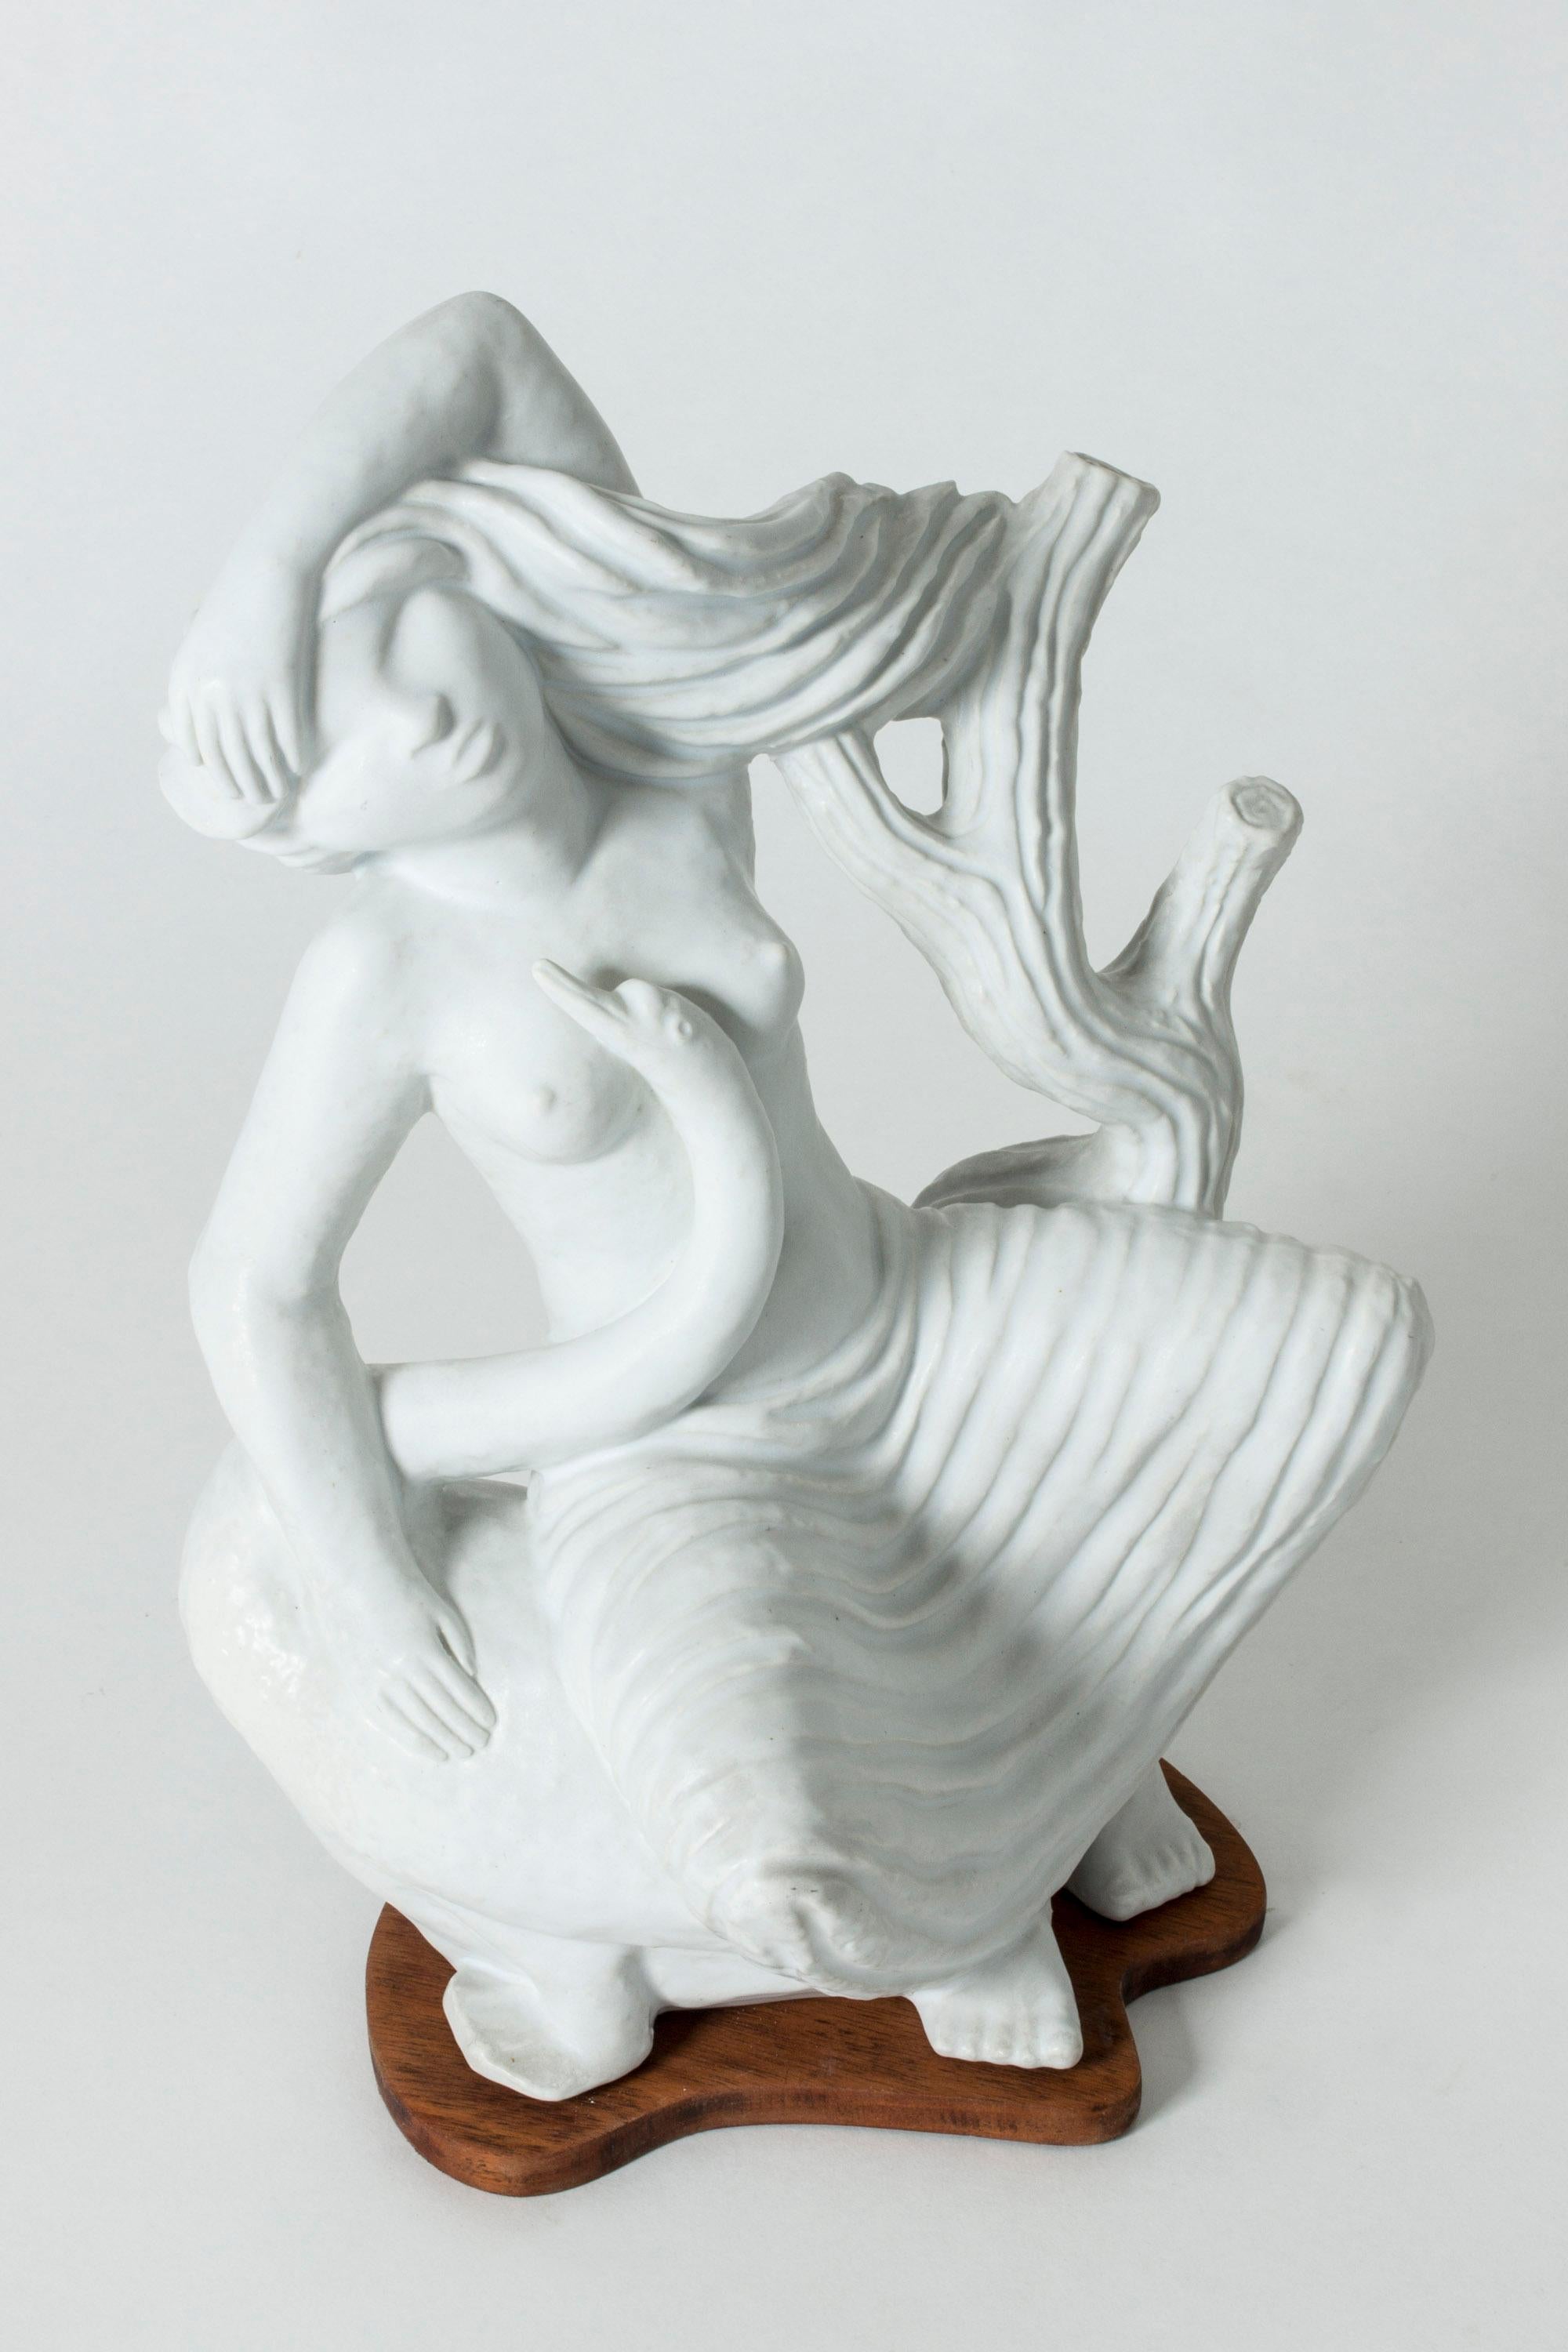 Stunning stoneware sculpture by Stig Lindberg, narrating the mythological story of Queen Leda and the Swan. Beautiful attention to detail and expressiveness in Leda’s face, flowing hair and posture.
The sculpture was made in Gustavsberg’s Studio